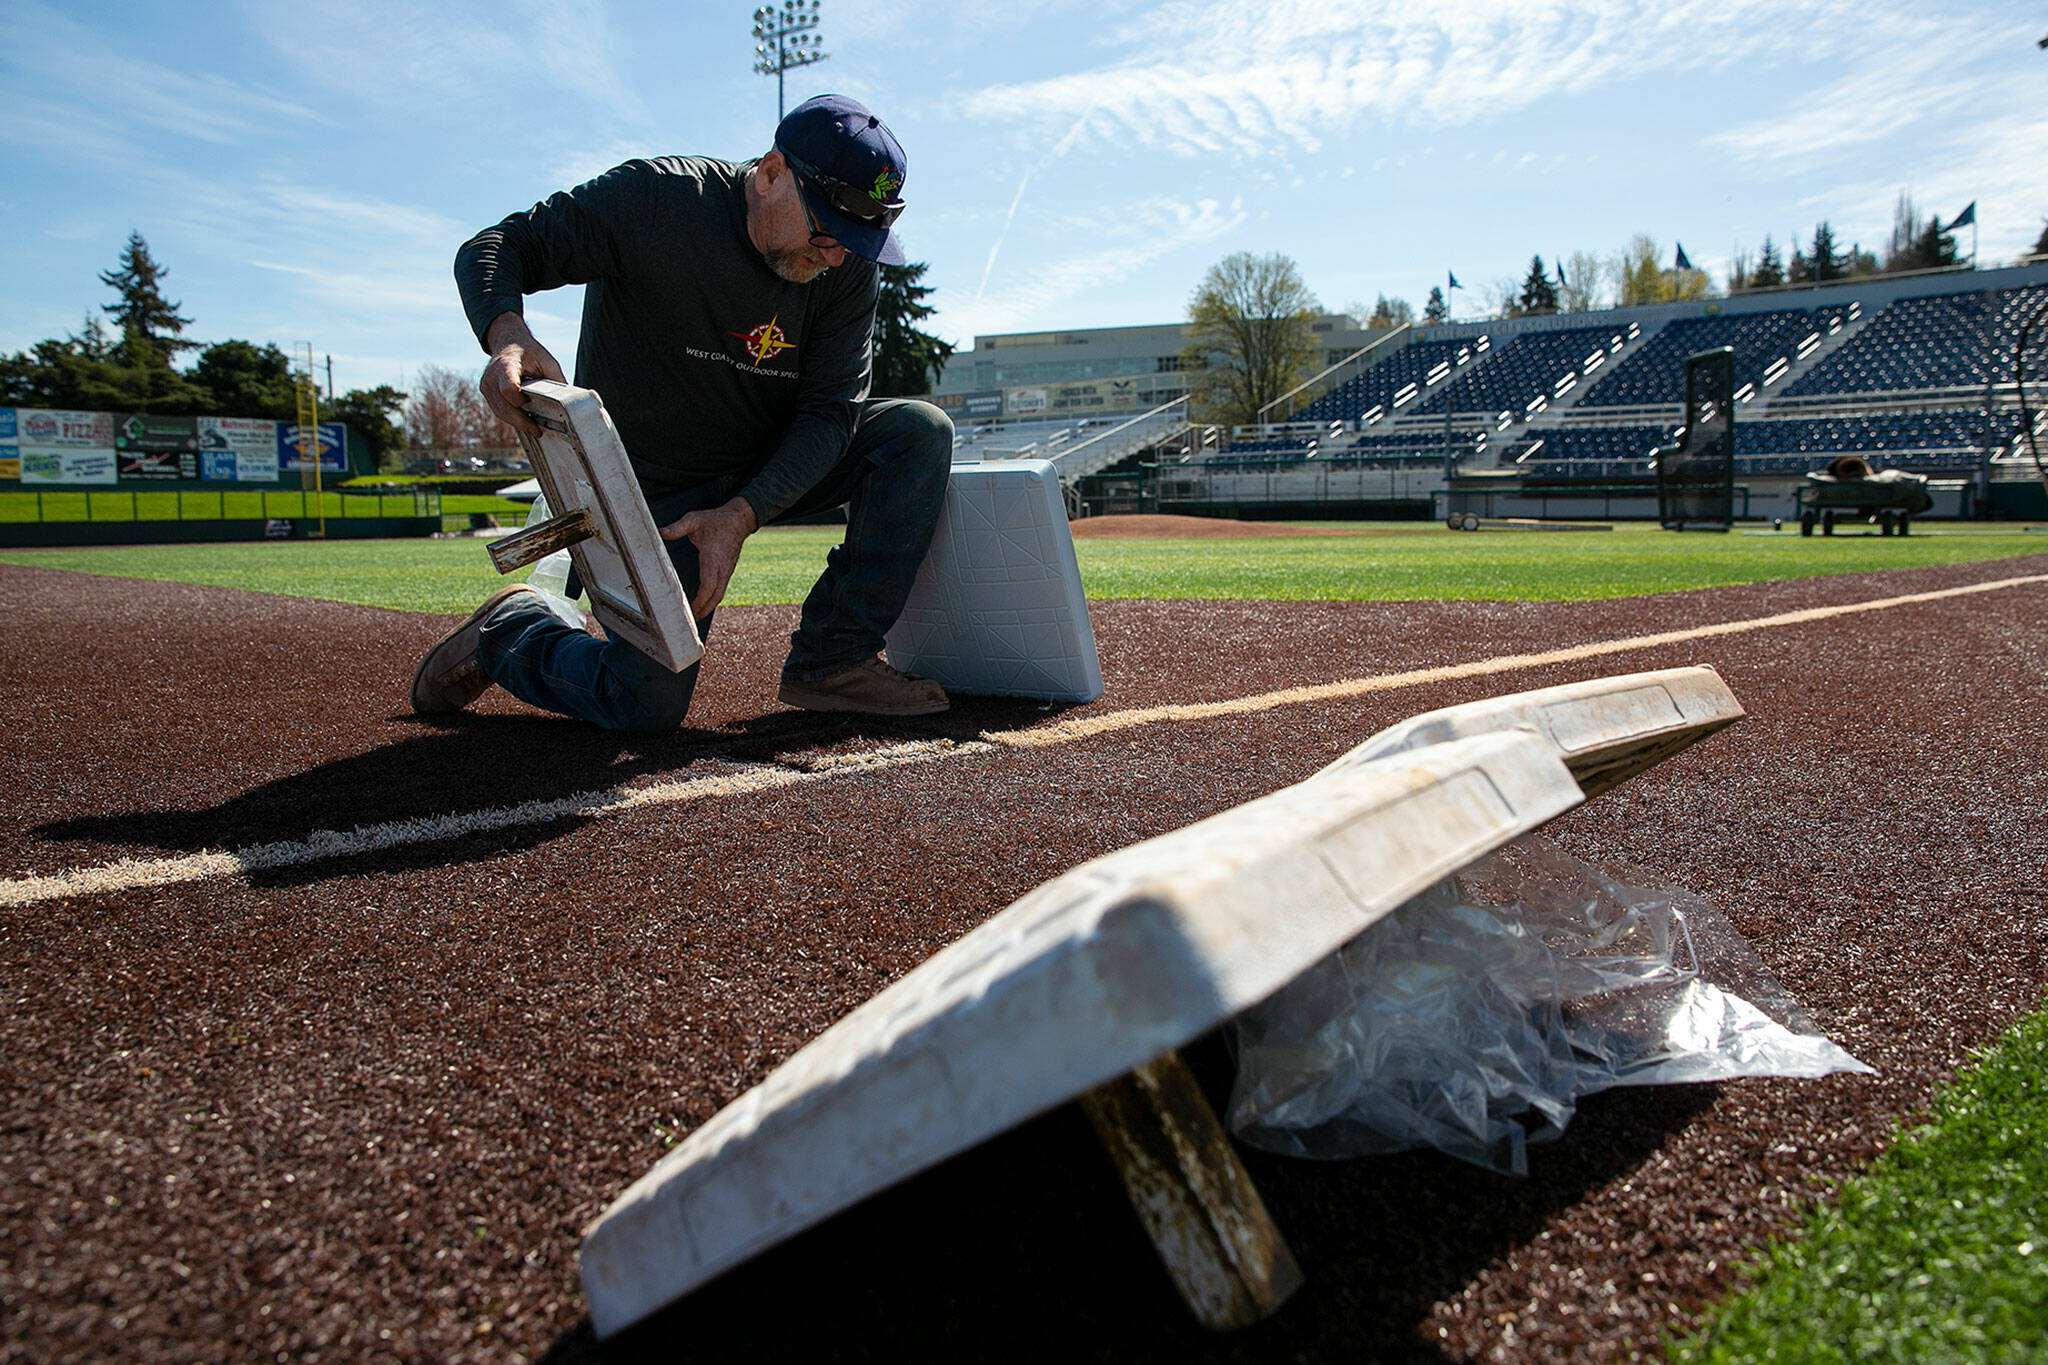 AquaSox head groundskeeper Ken Brooks changes out third base to one of the new larger bases being used in the minors prior to a team workout Wednesday at Funko Field in Everett. (Ryan Berry / The Herald)